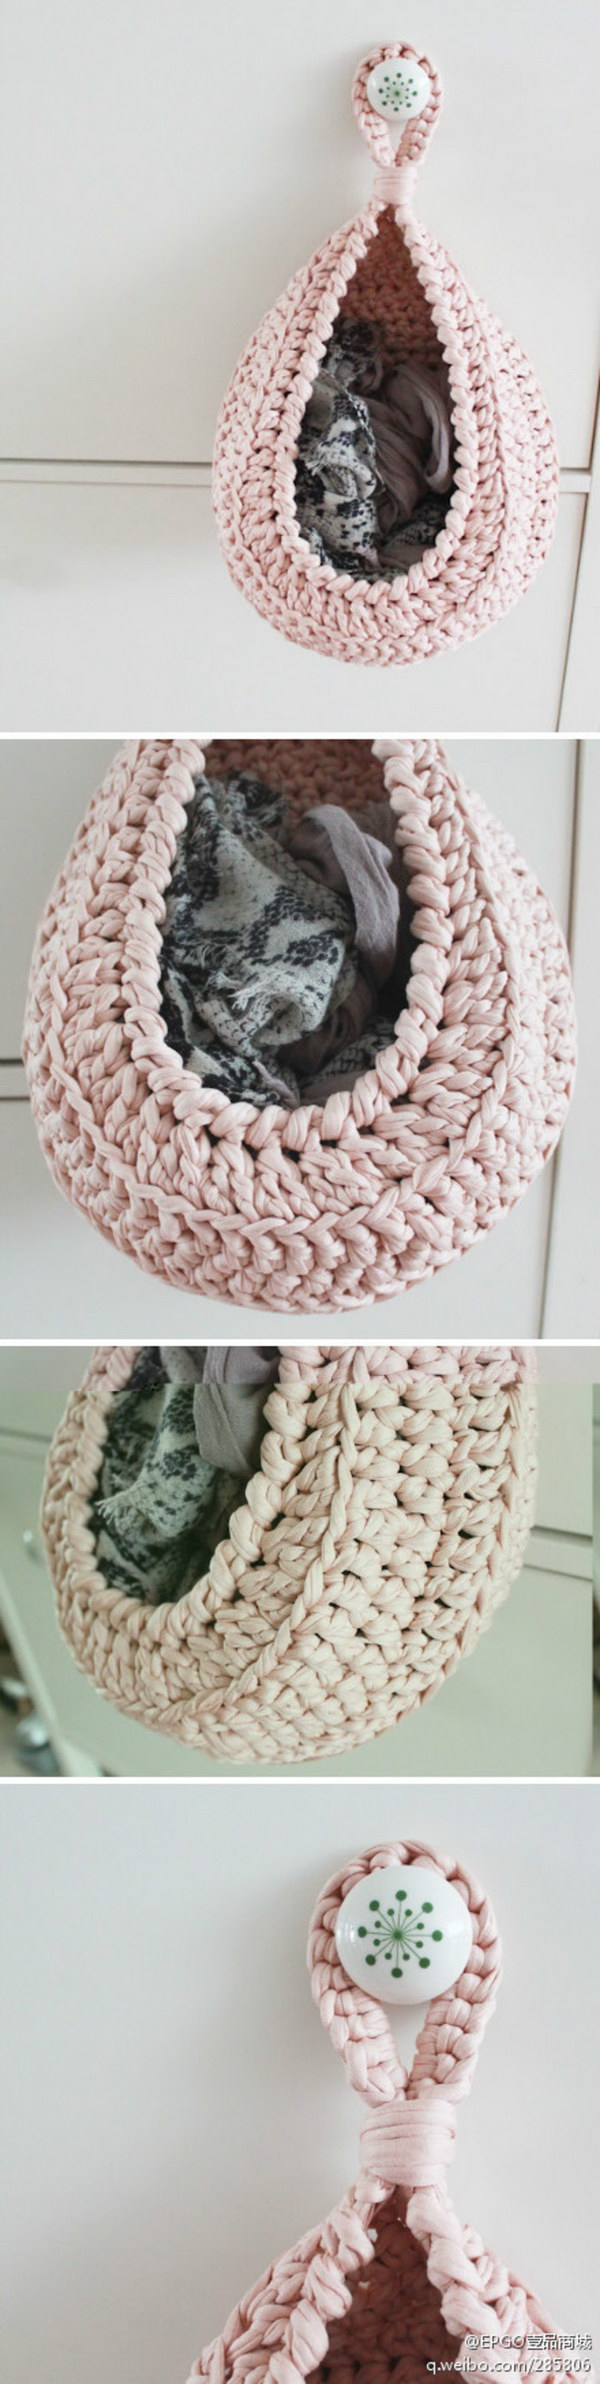 Crochet Cat Bed Pattern Free 30 Easy Crochet Projects With Free Patterns For Beginners